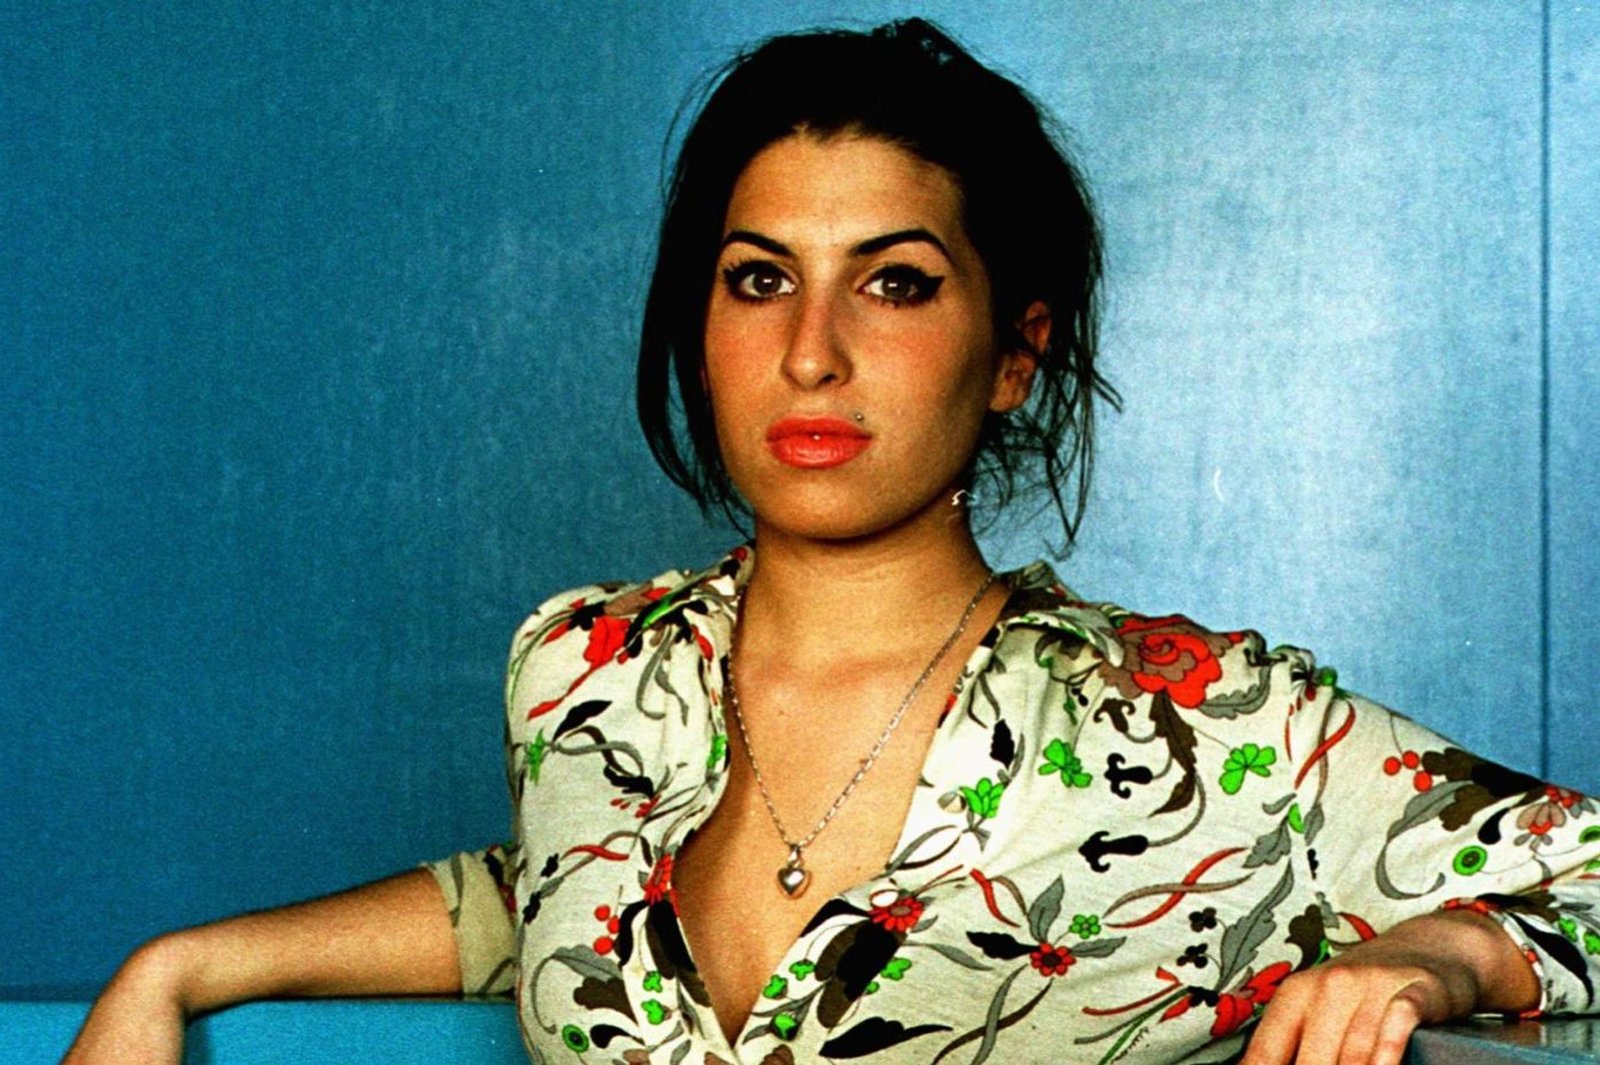 Quotes from Amy Winehouse: "Never lie to someone who trusts you. Never trust the one who lied to you."